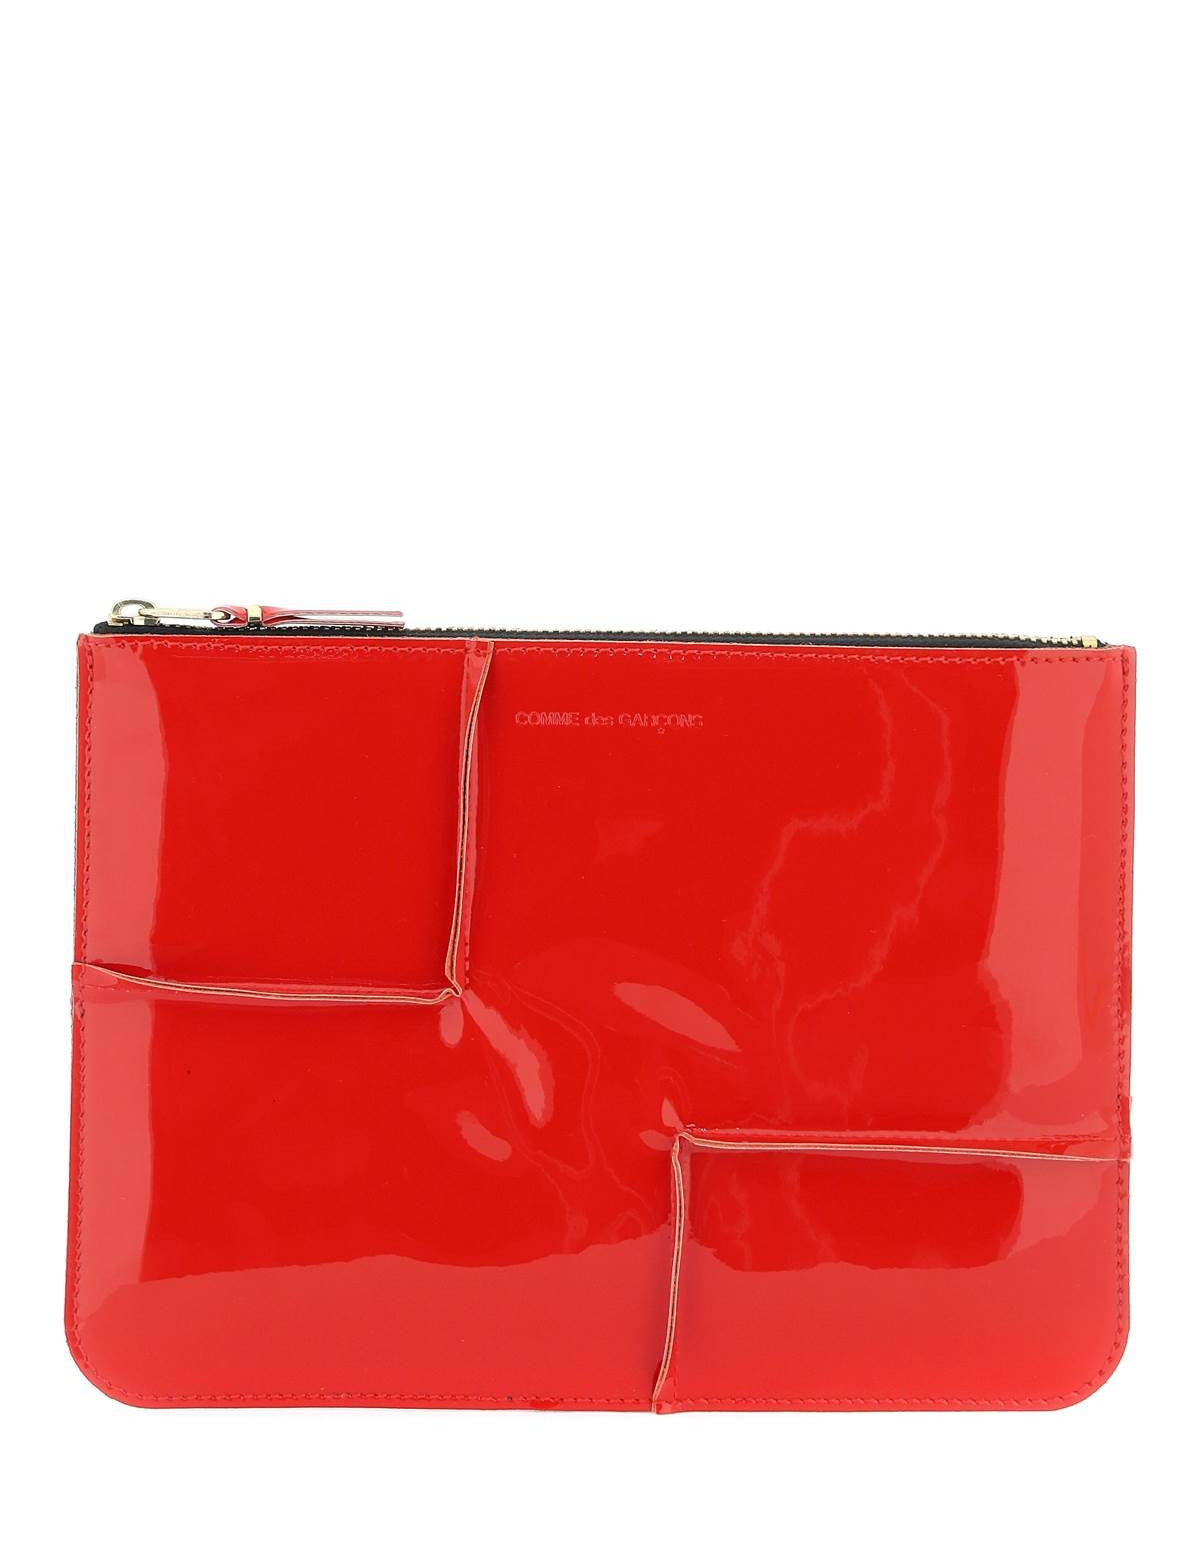 comme-des-garcons-wallet-glossy-patent-leather.jpg